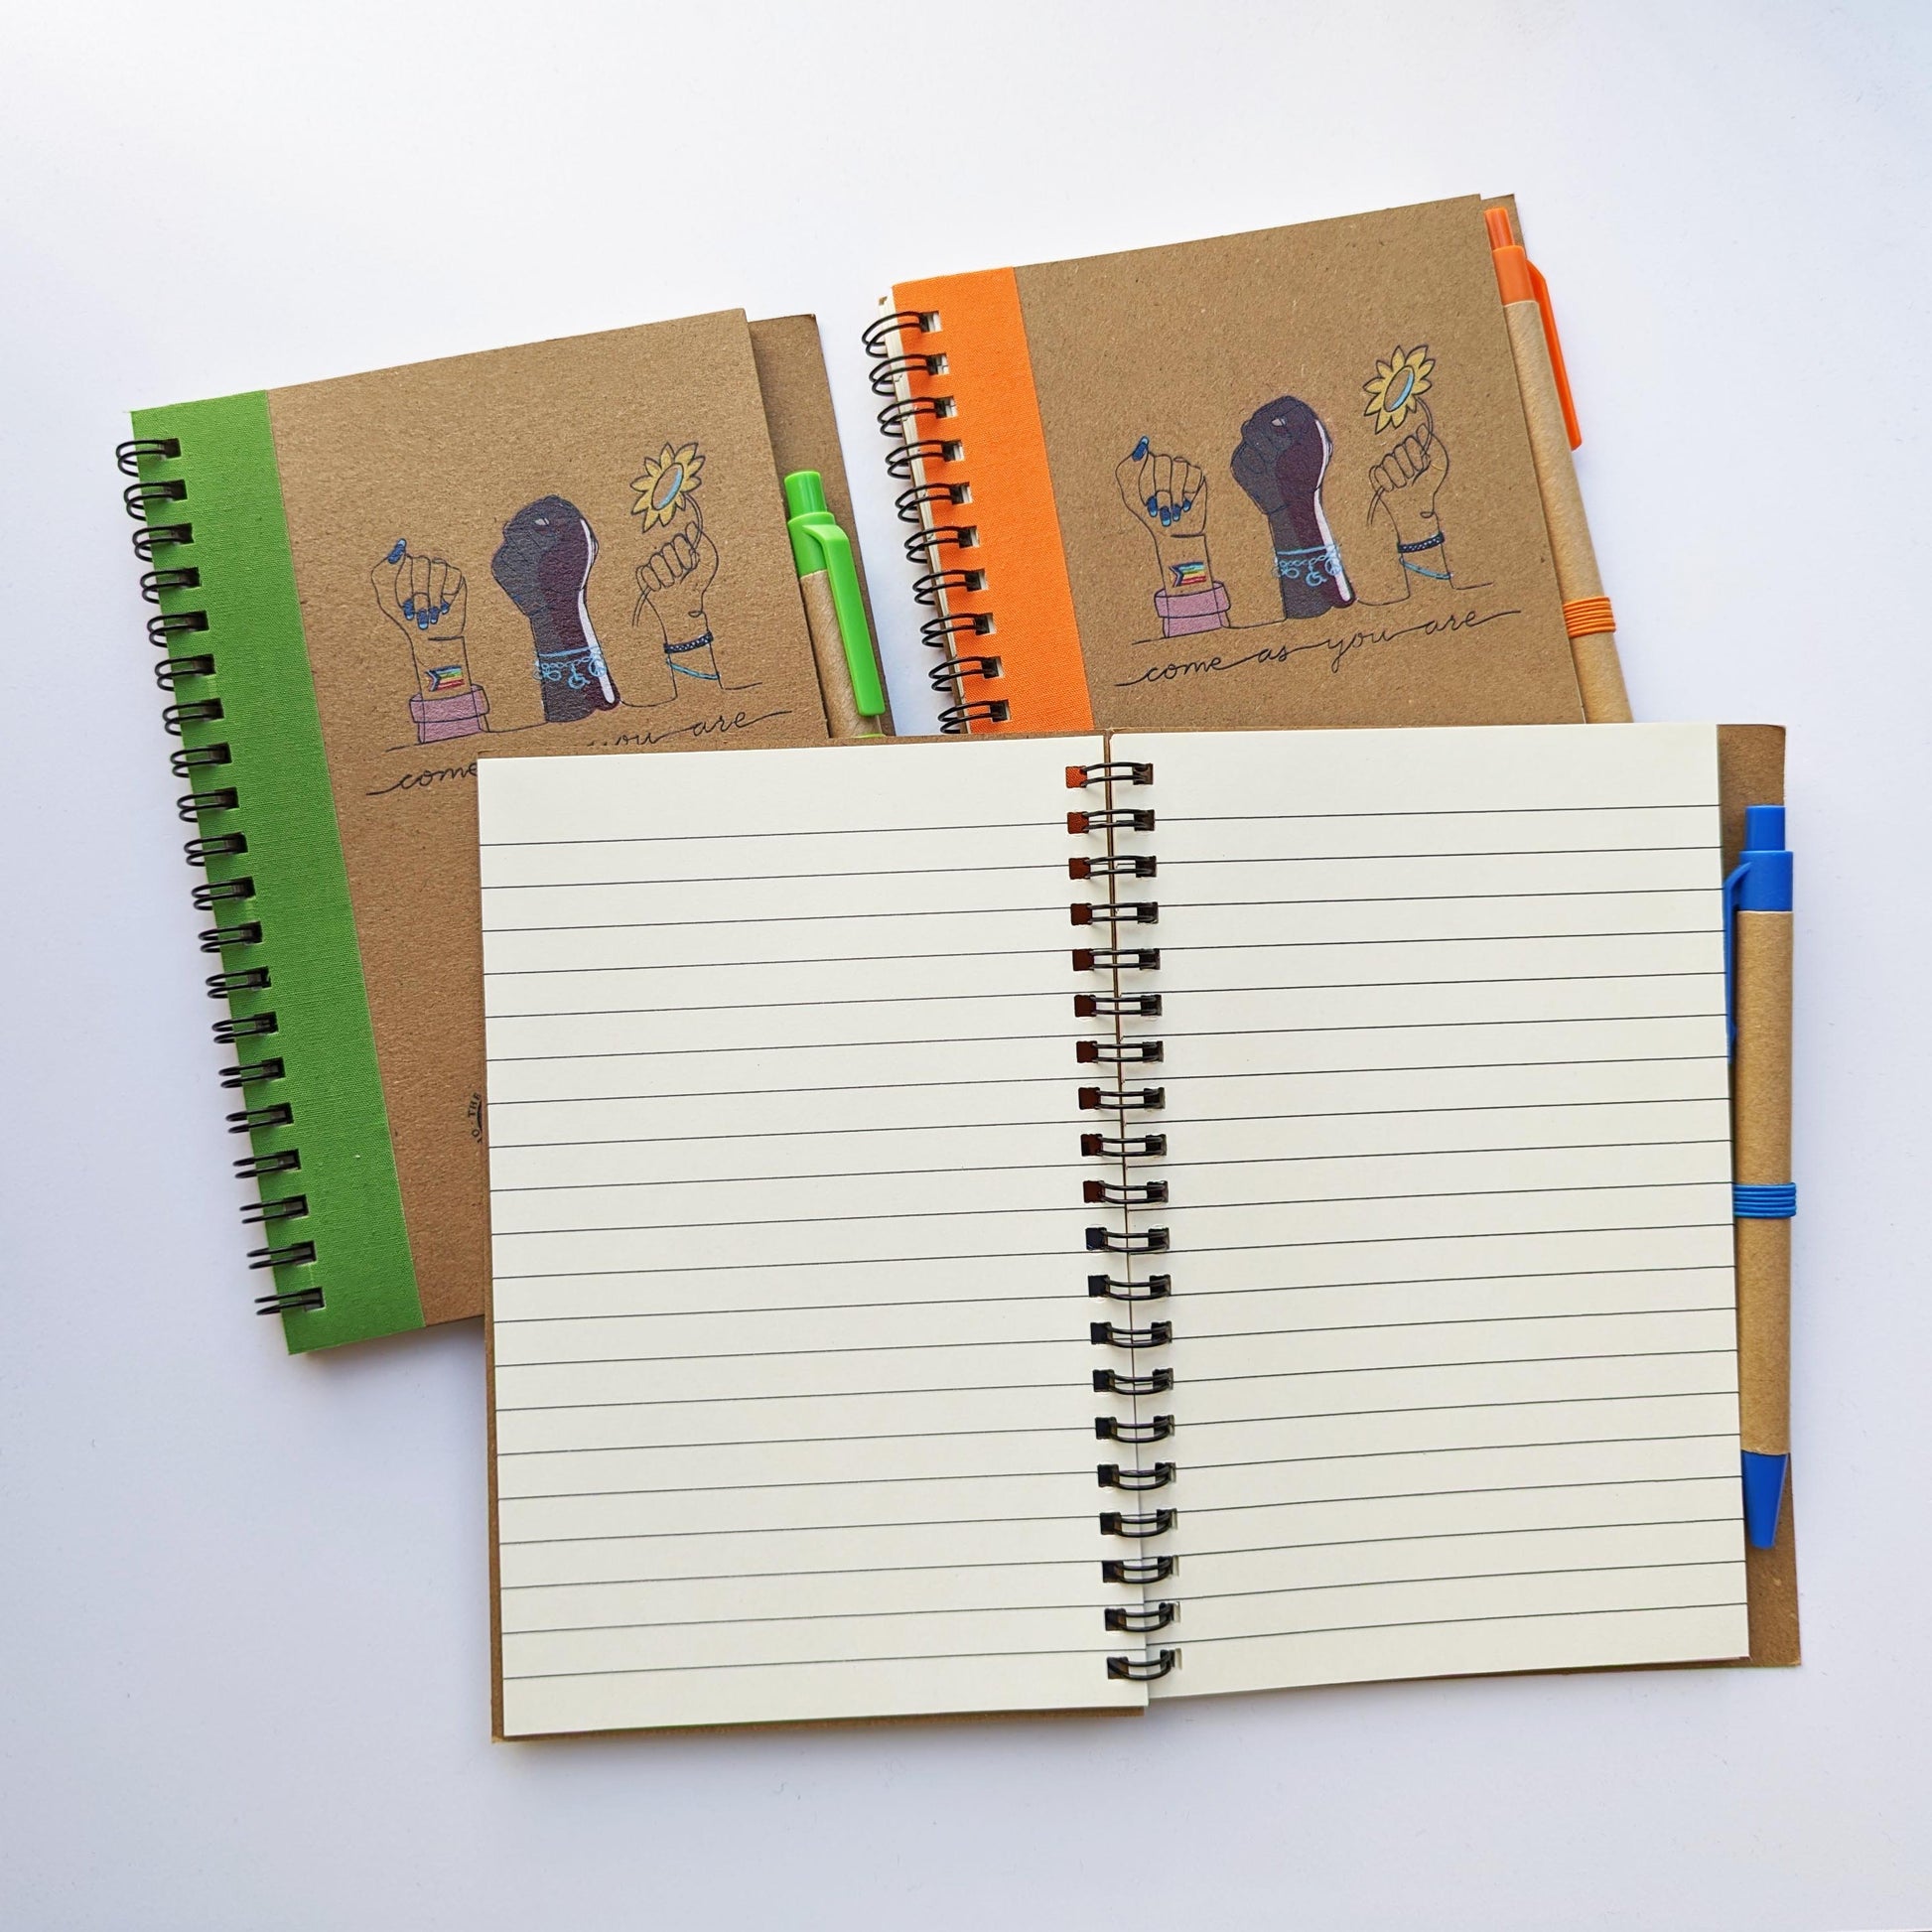 The three notebooks pictured with one open showing lined pages.